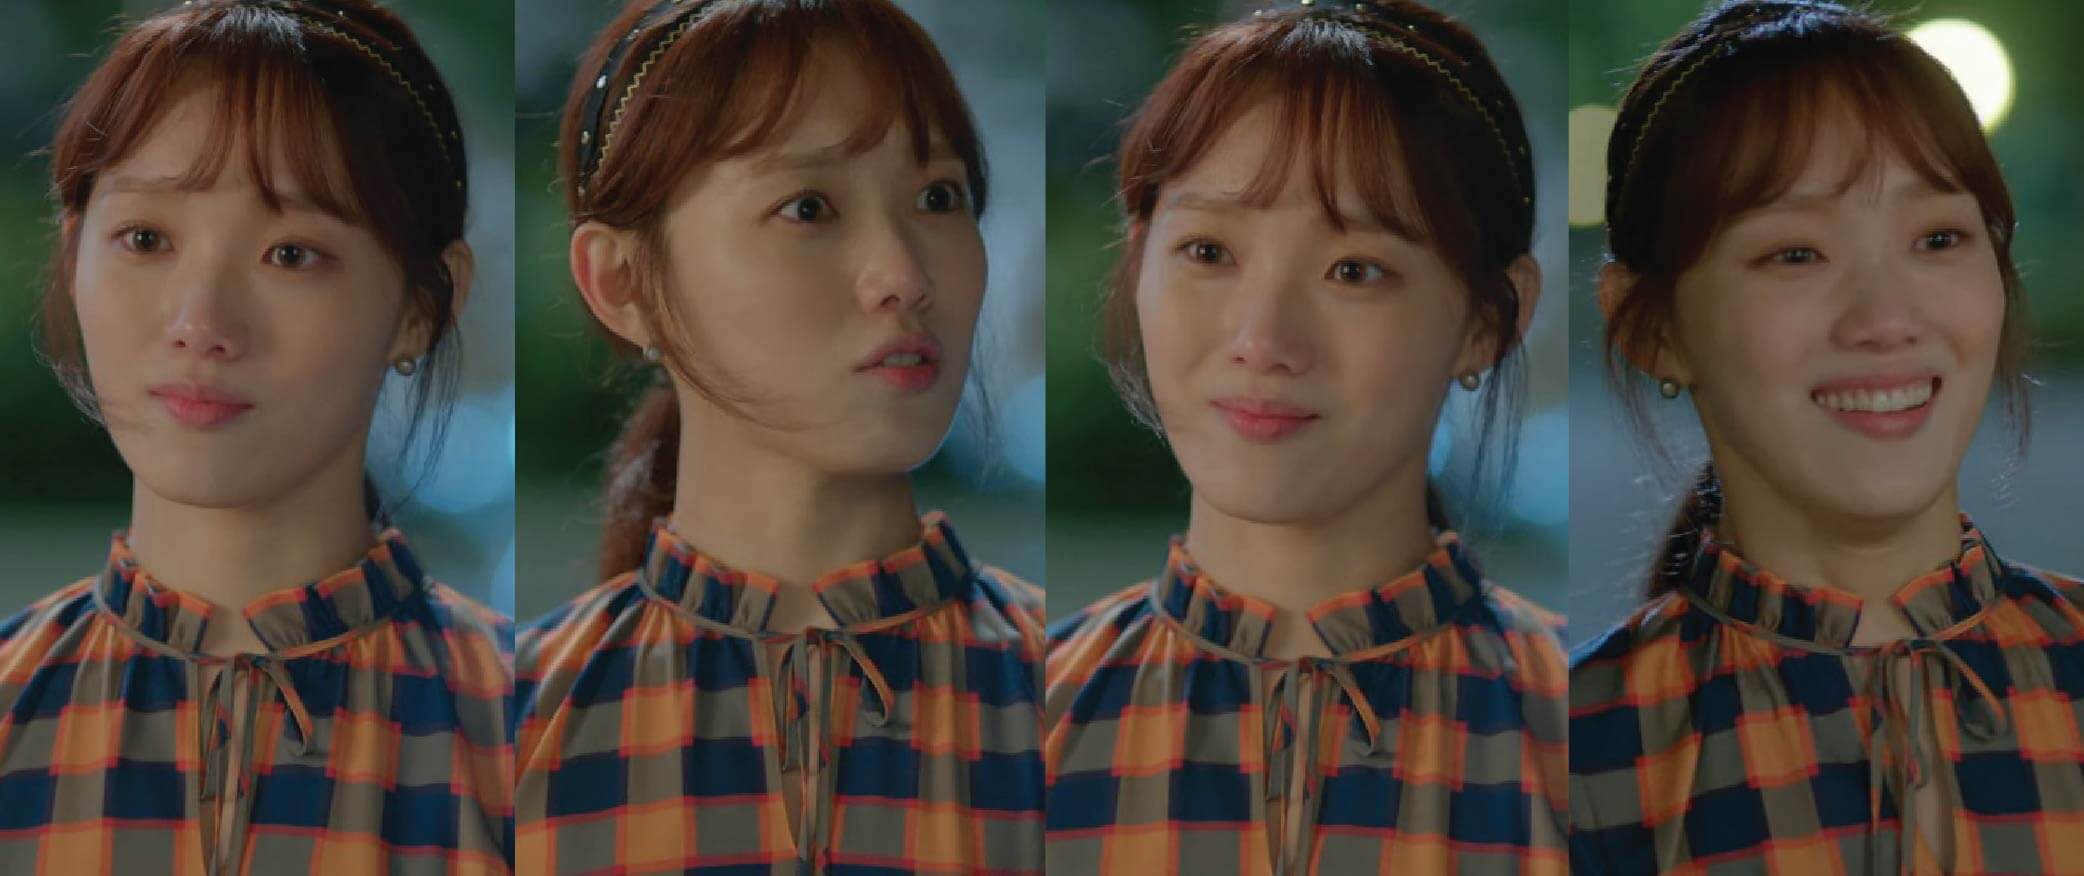 The many faces and emotions of Choi Michaela played by the beautiful and talented actress, Lee Sung Kyung.